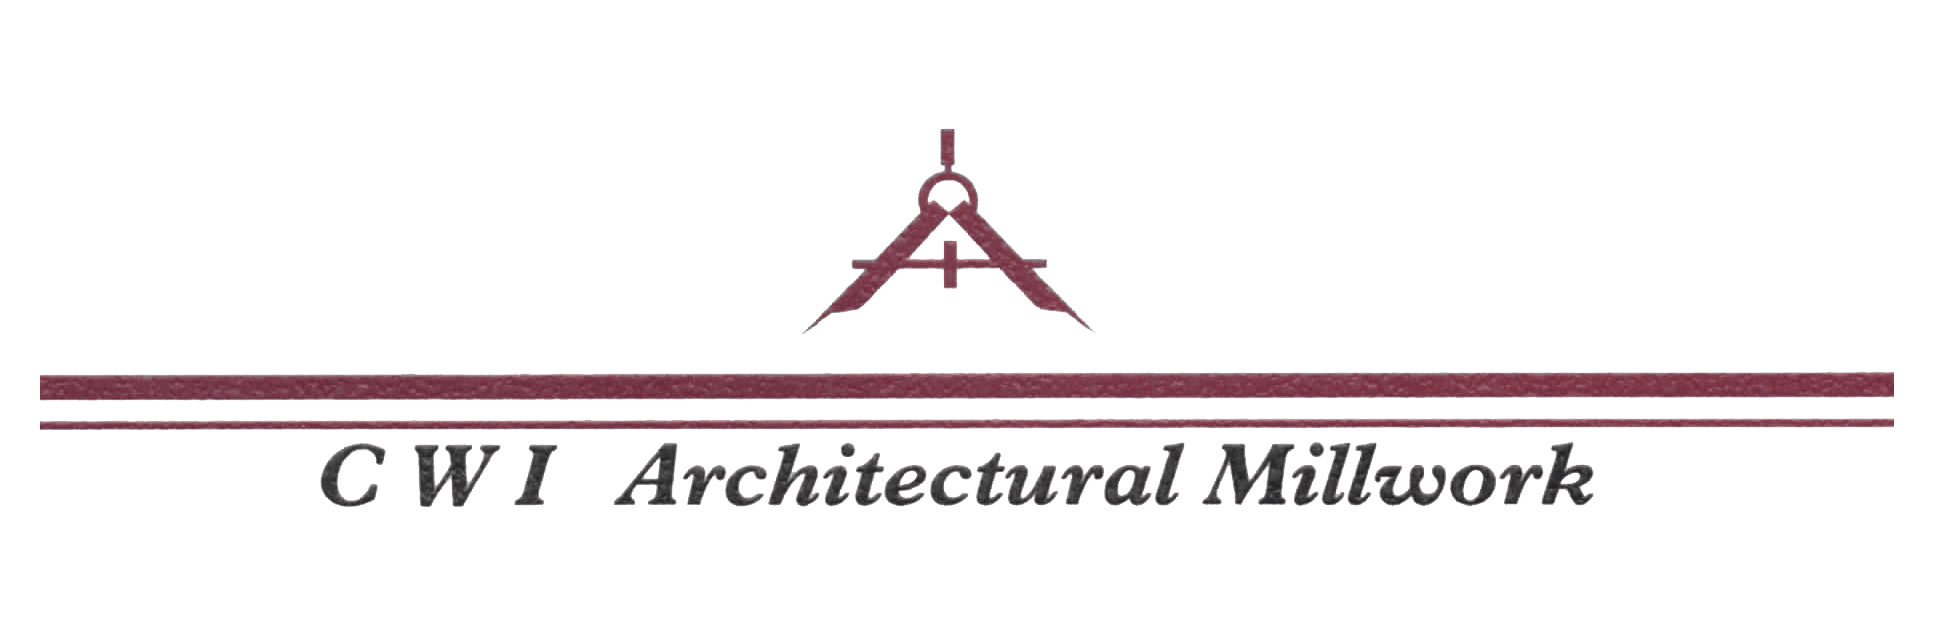 CWI Architectural Mill Work Logo Transparent